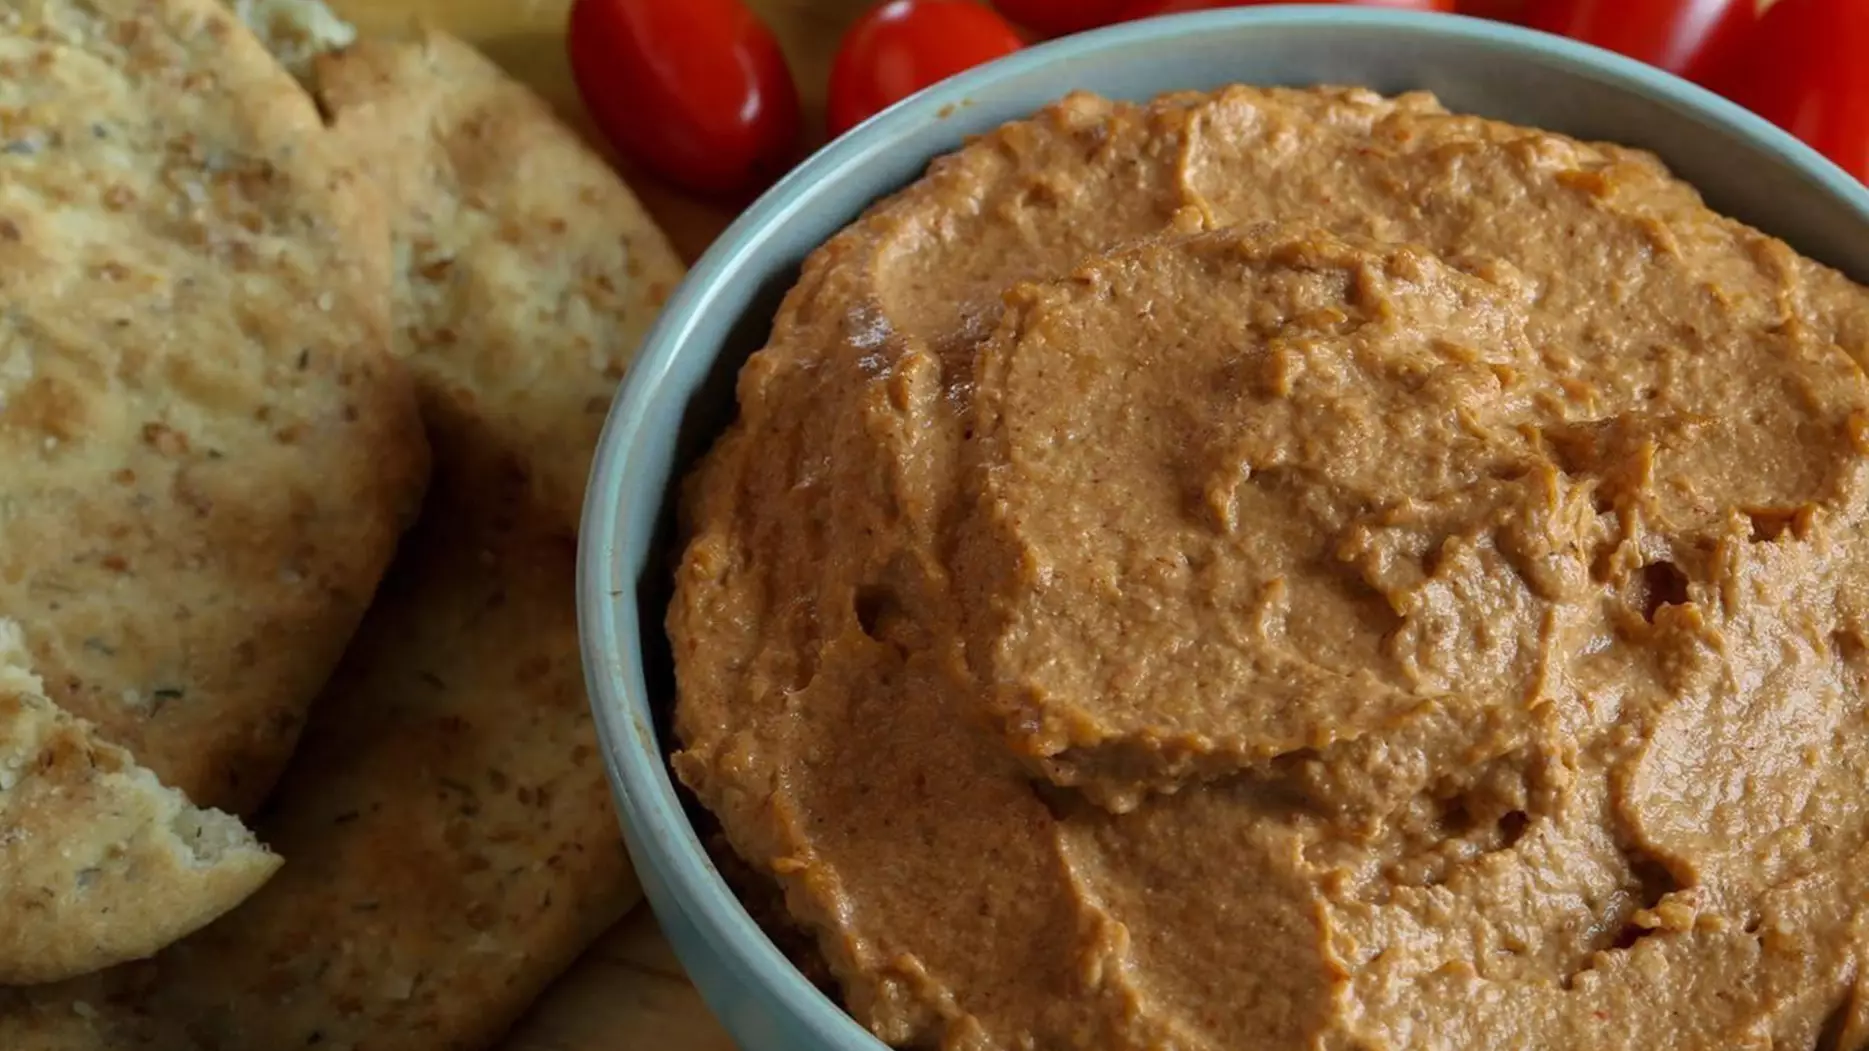 Aussie Restaurant Fined $100,000 After Customer Died After Eating Hummus